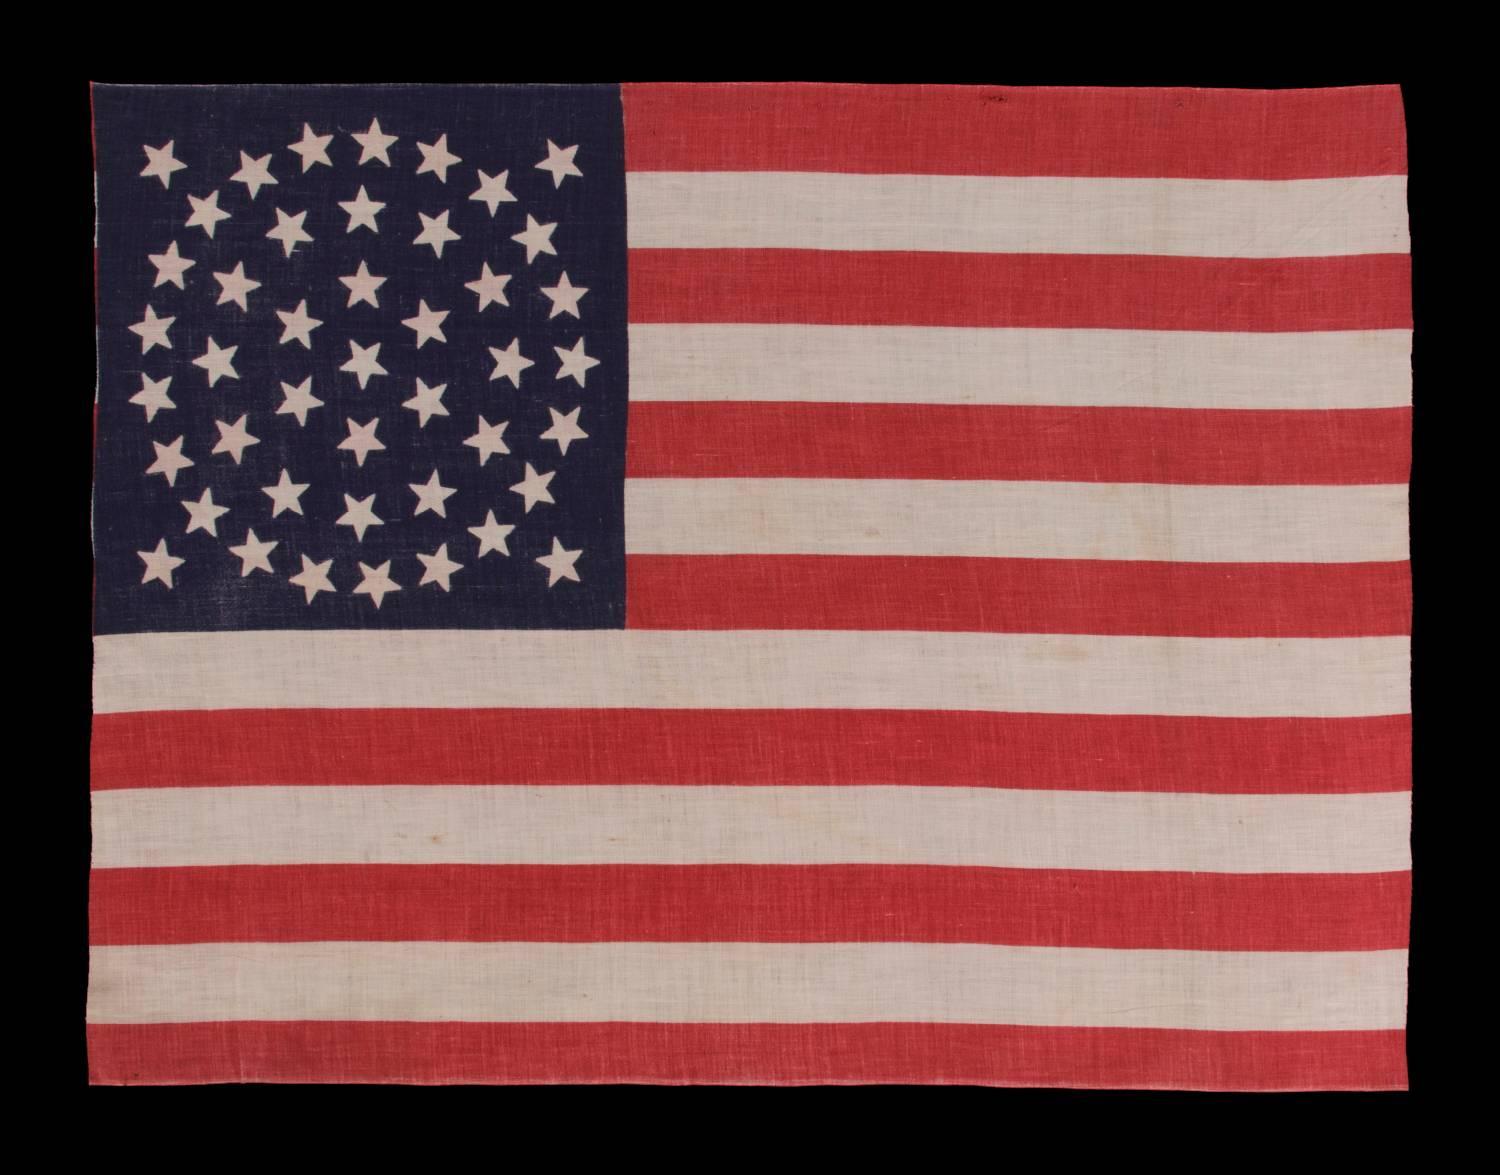 44 STARS ON A LARGE SCALE PARADE FLAG, WYOMING STATEHOOD, 1890-1896, RARE IN THIS PERIOD WITH A WREATH CONFIGURATION:

44 star American parade flag with triple wreath medallion star configuration, printed on cotton. This highly desired star pattern